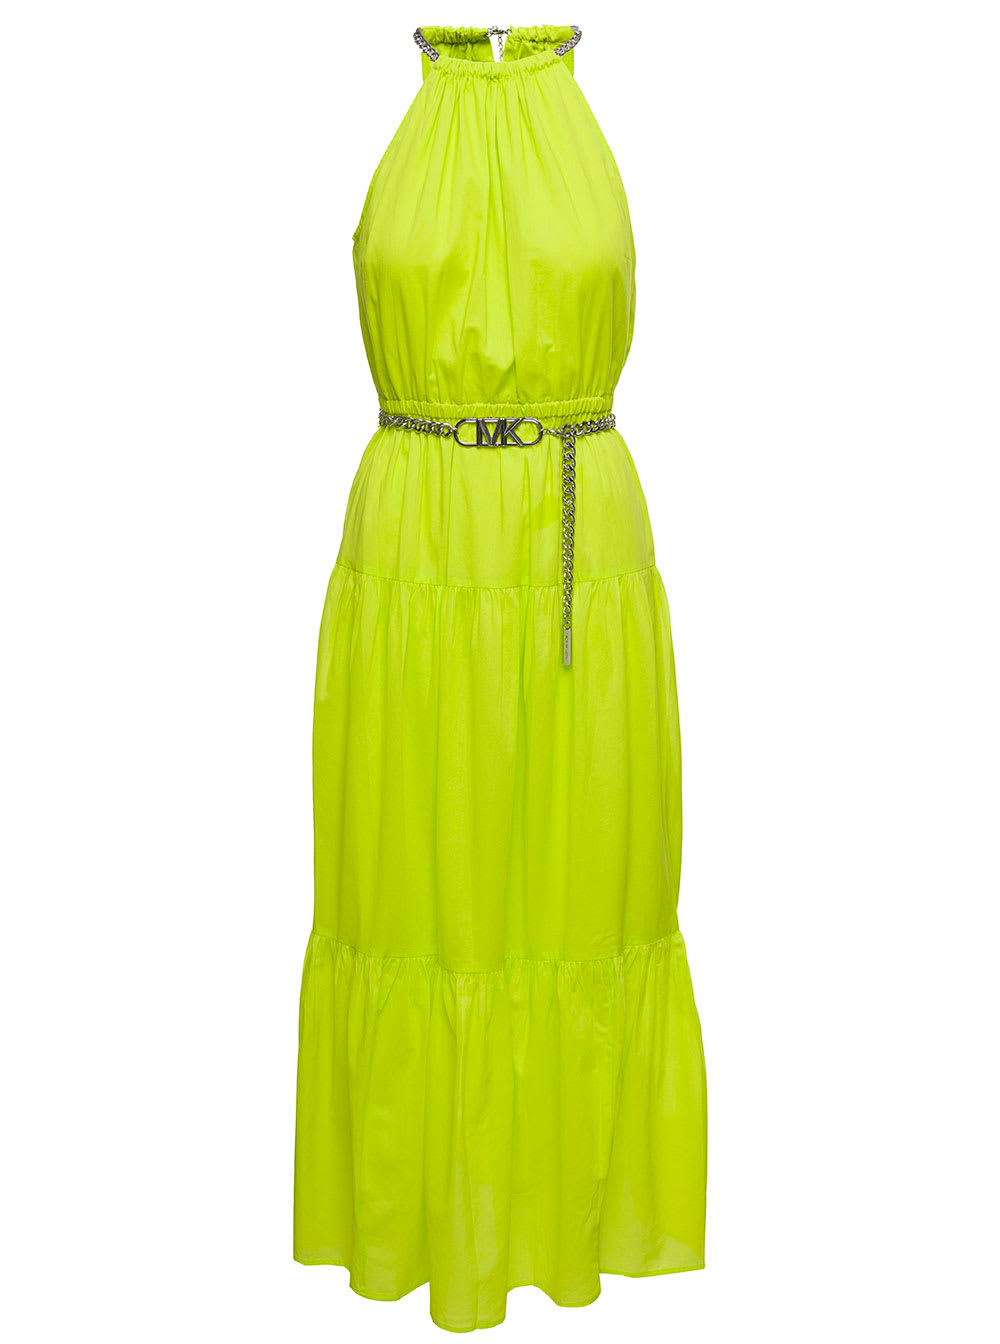 Neon Yellow Halter Neck Maxi Dress With Chain Belt With Logo In Cotton Woman